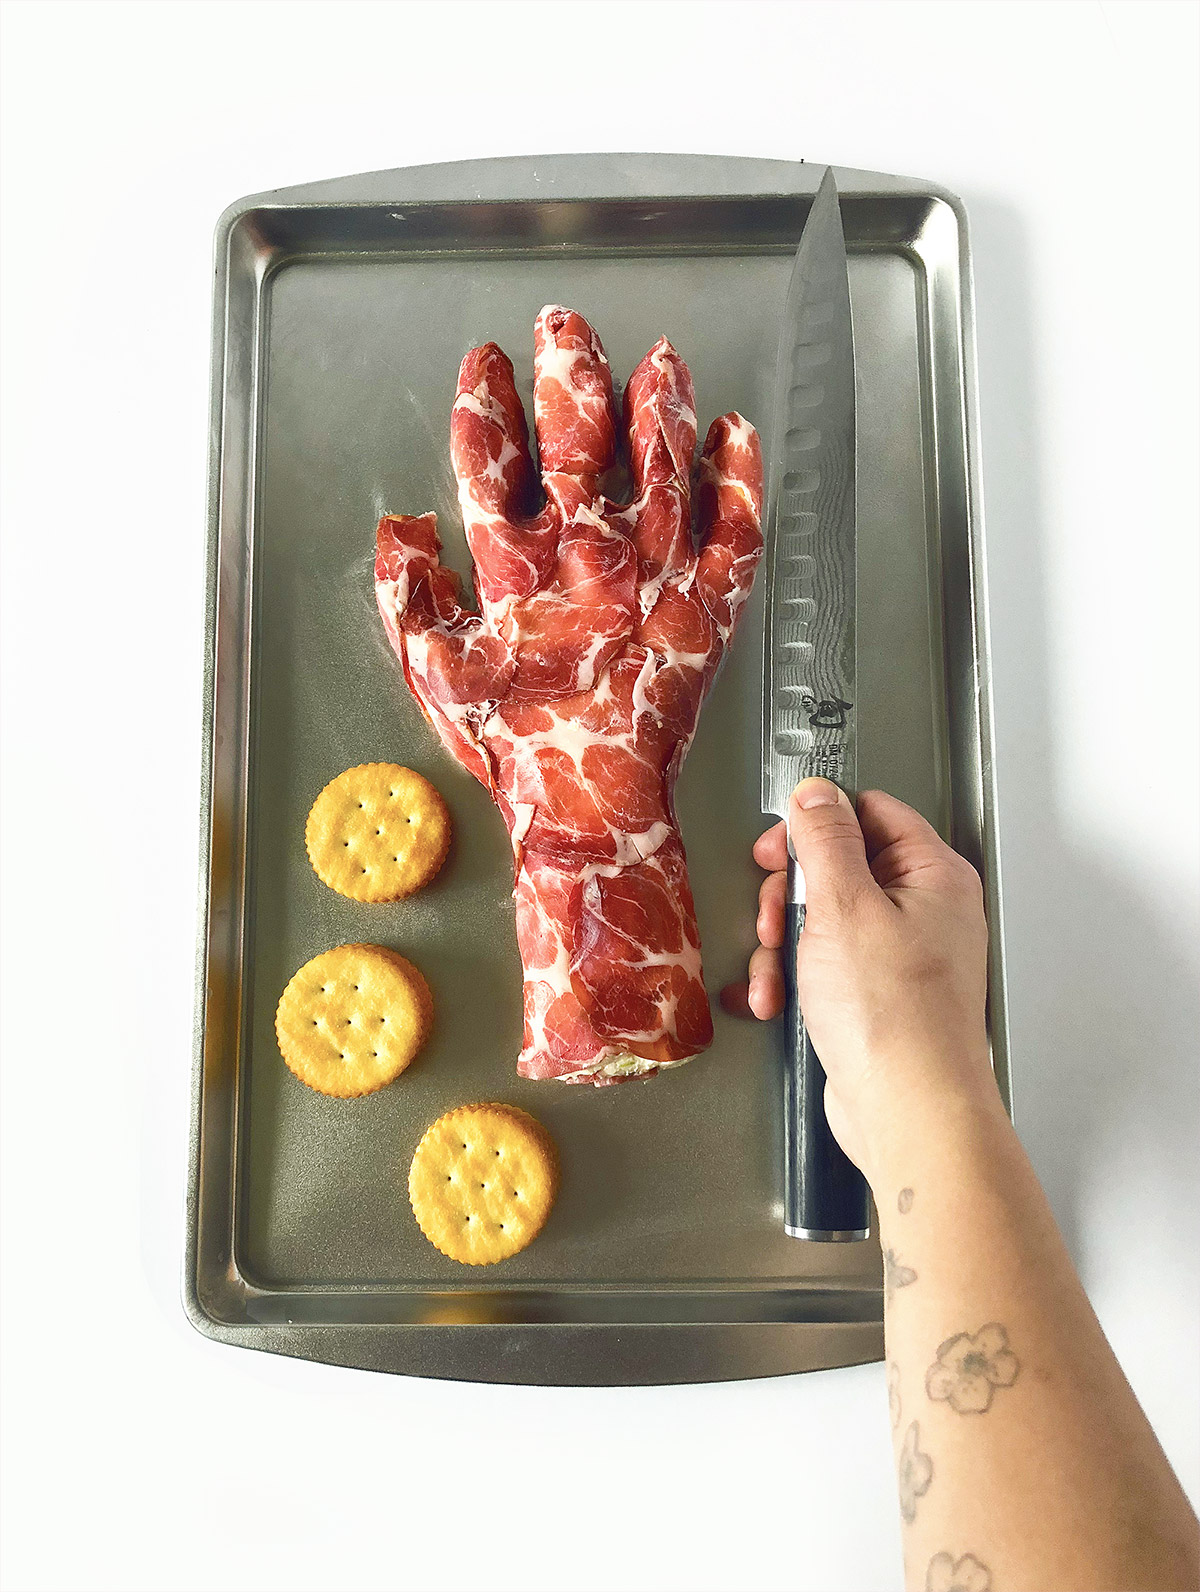 Severed Hand Cheese Ball with Prosciutto and Crackers.